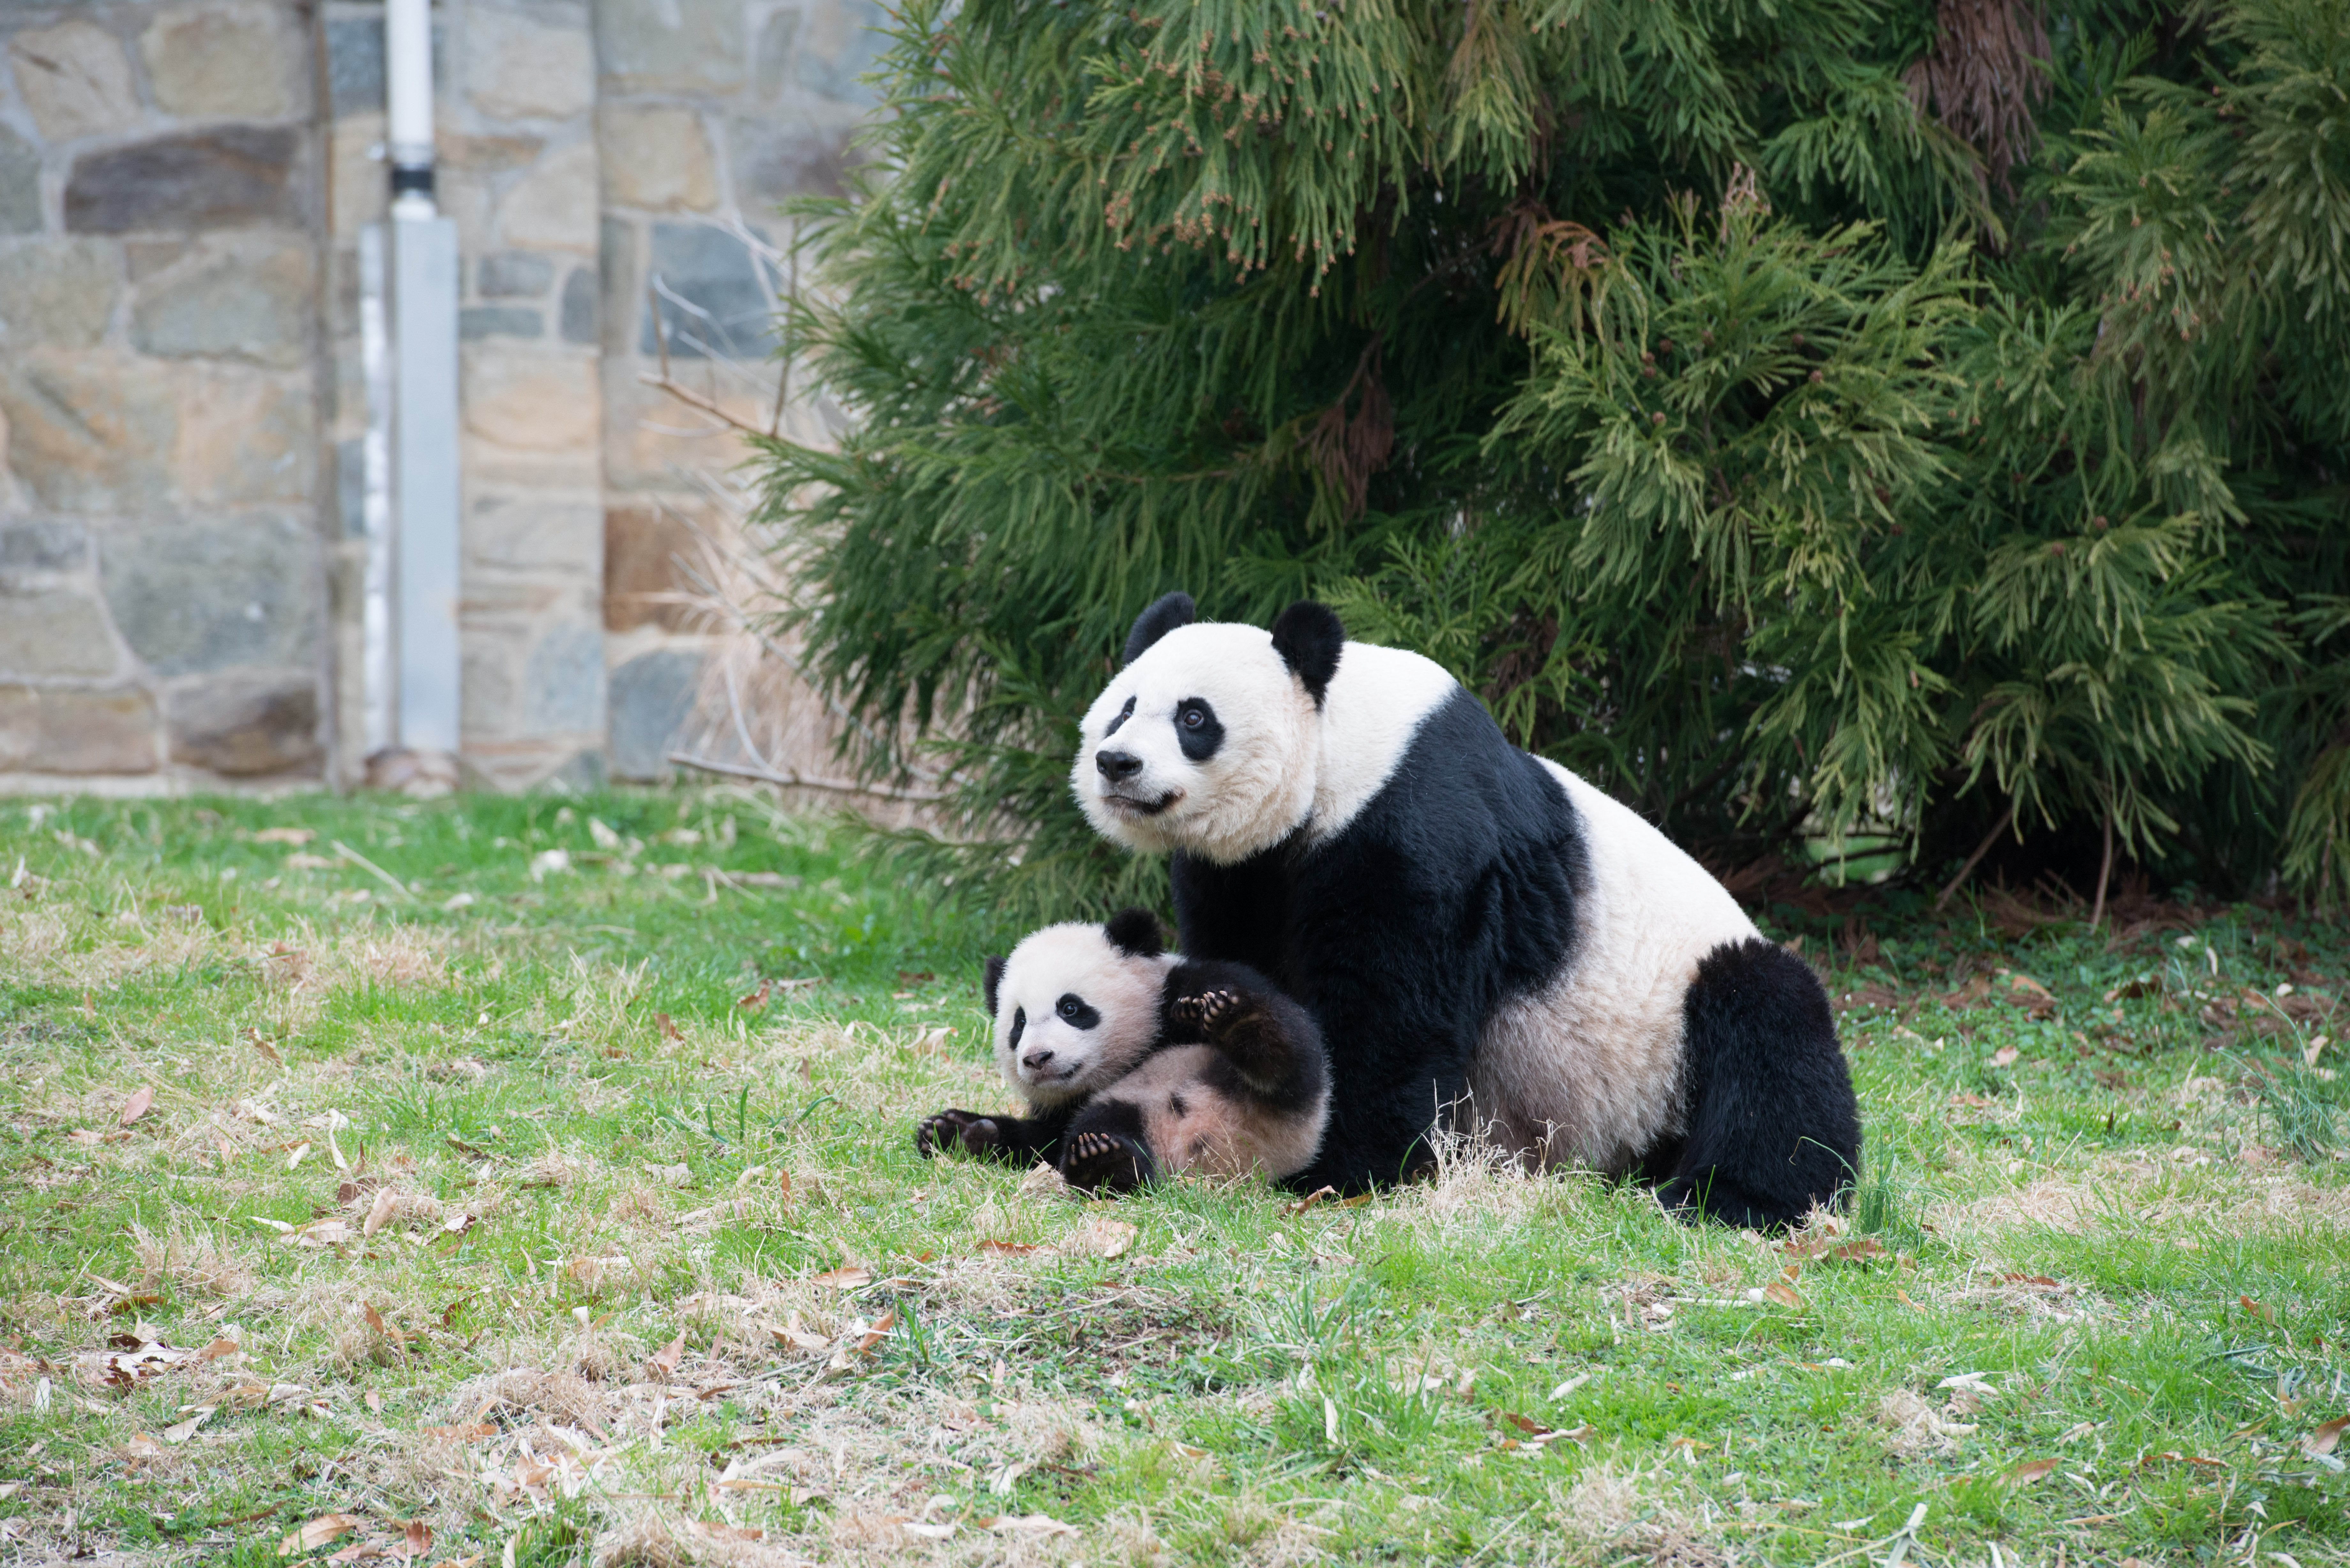 An adult panda sits in the grass with a cub about 1/3 her size by her feet. The cub is rolling on its back playfully.